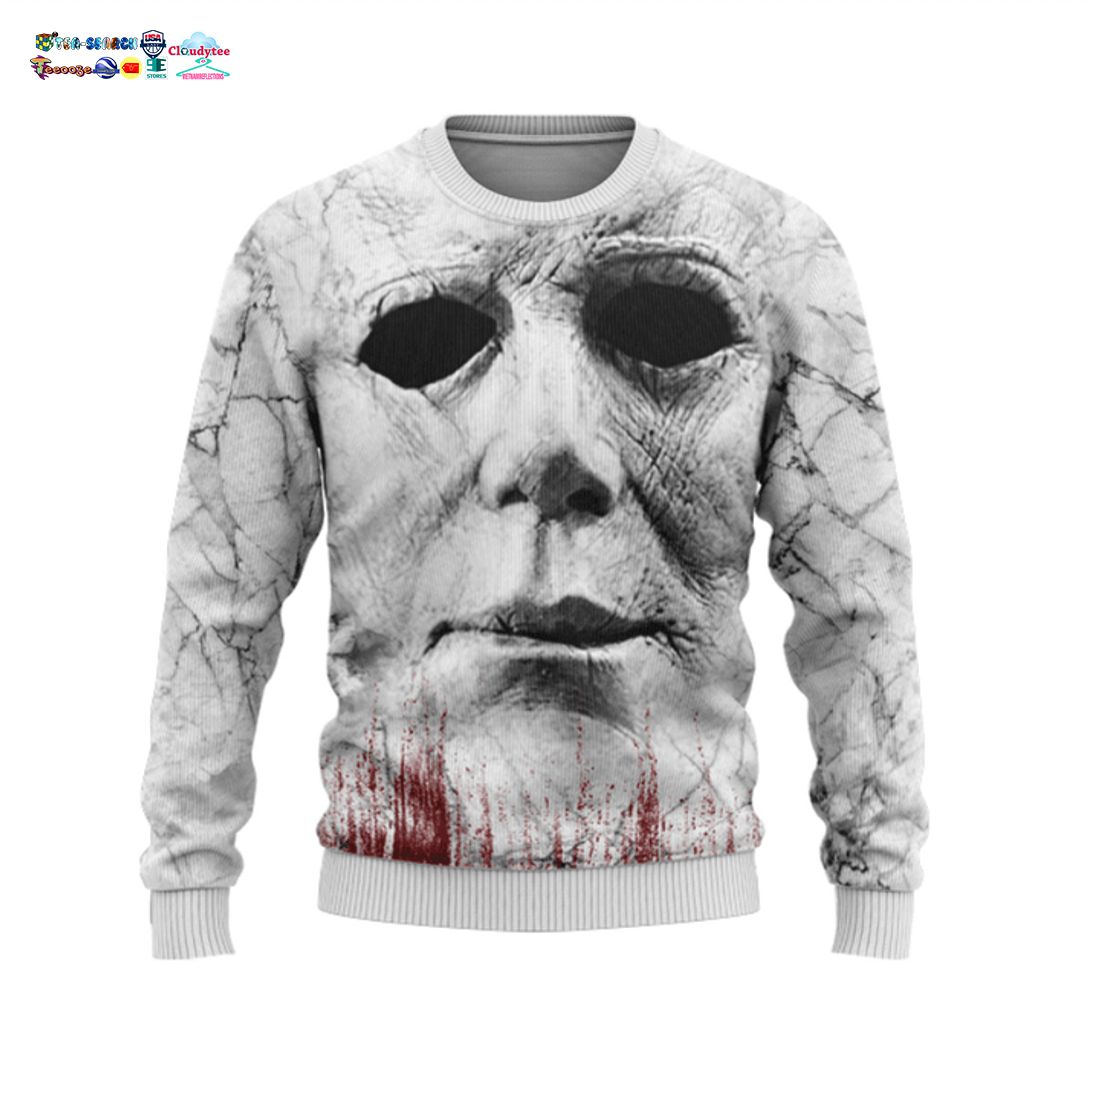 Michael Myers No Lives Matter Ugly Christmas Sweater